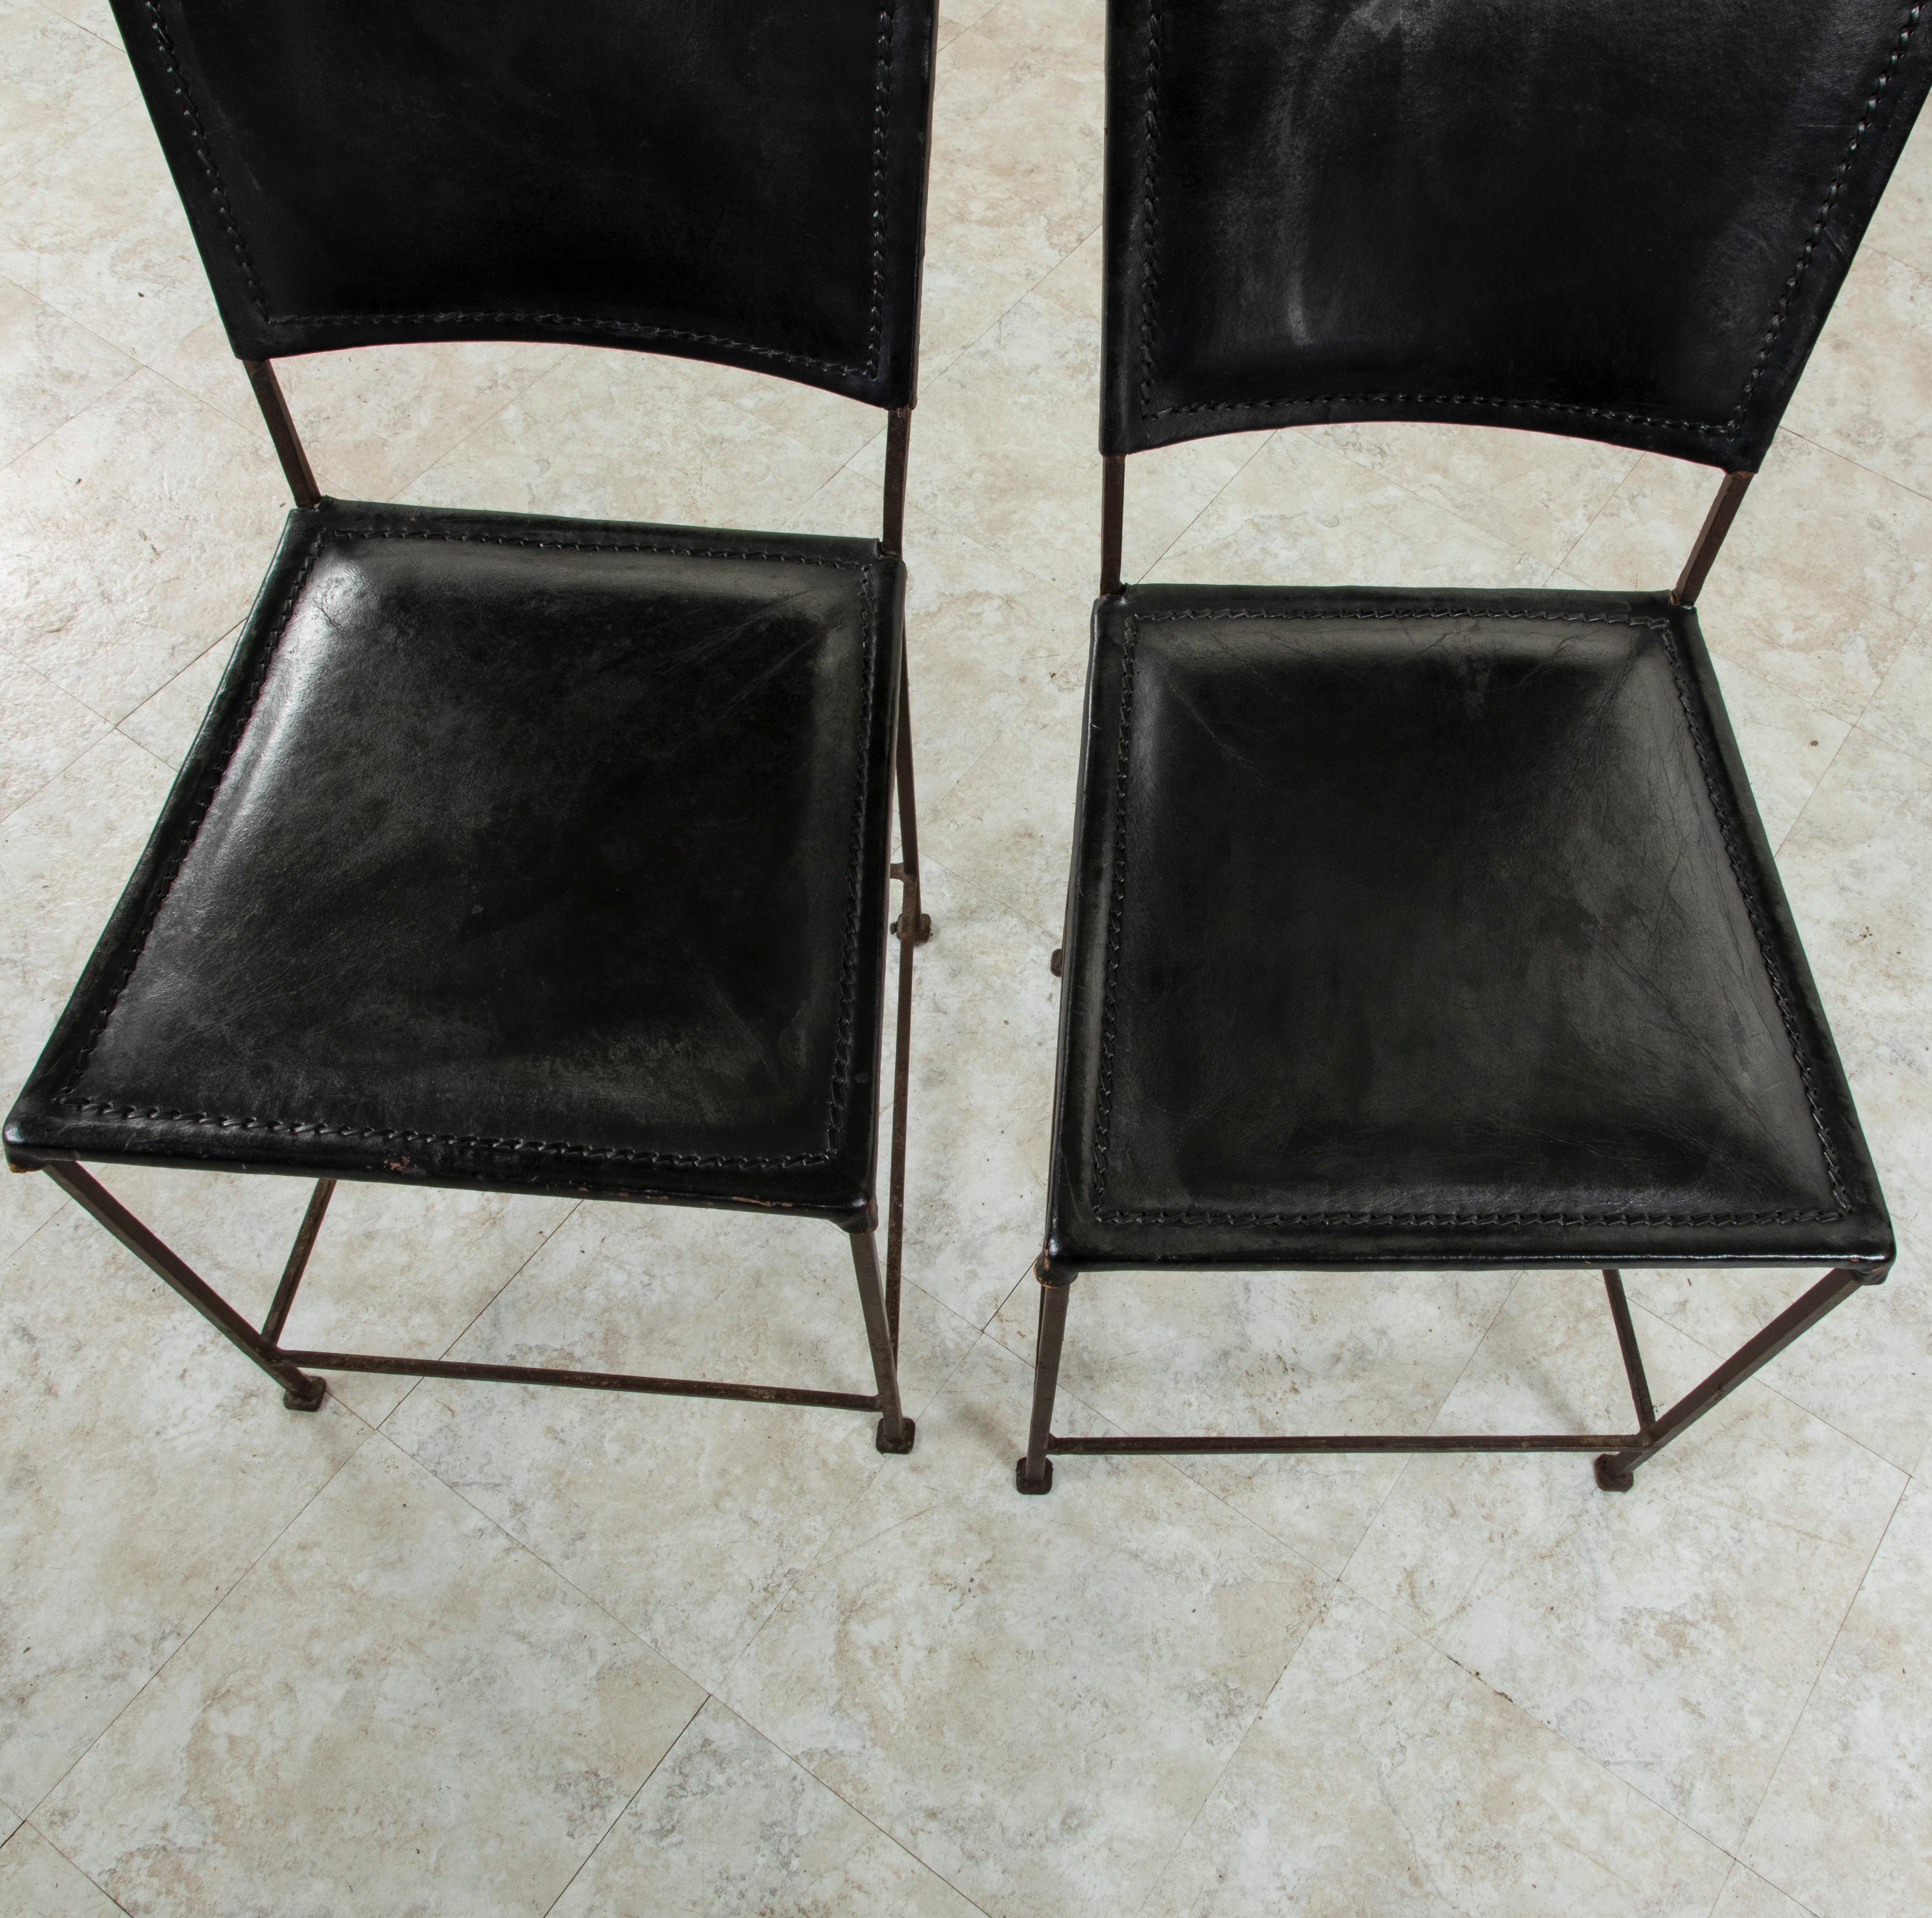 Mid-20th Century French Iron Side Chairs With Leather Seats and Backs 3